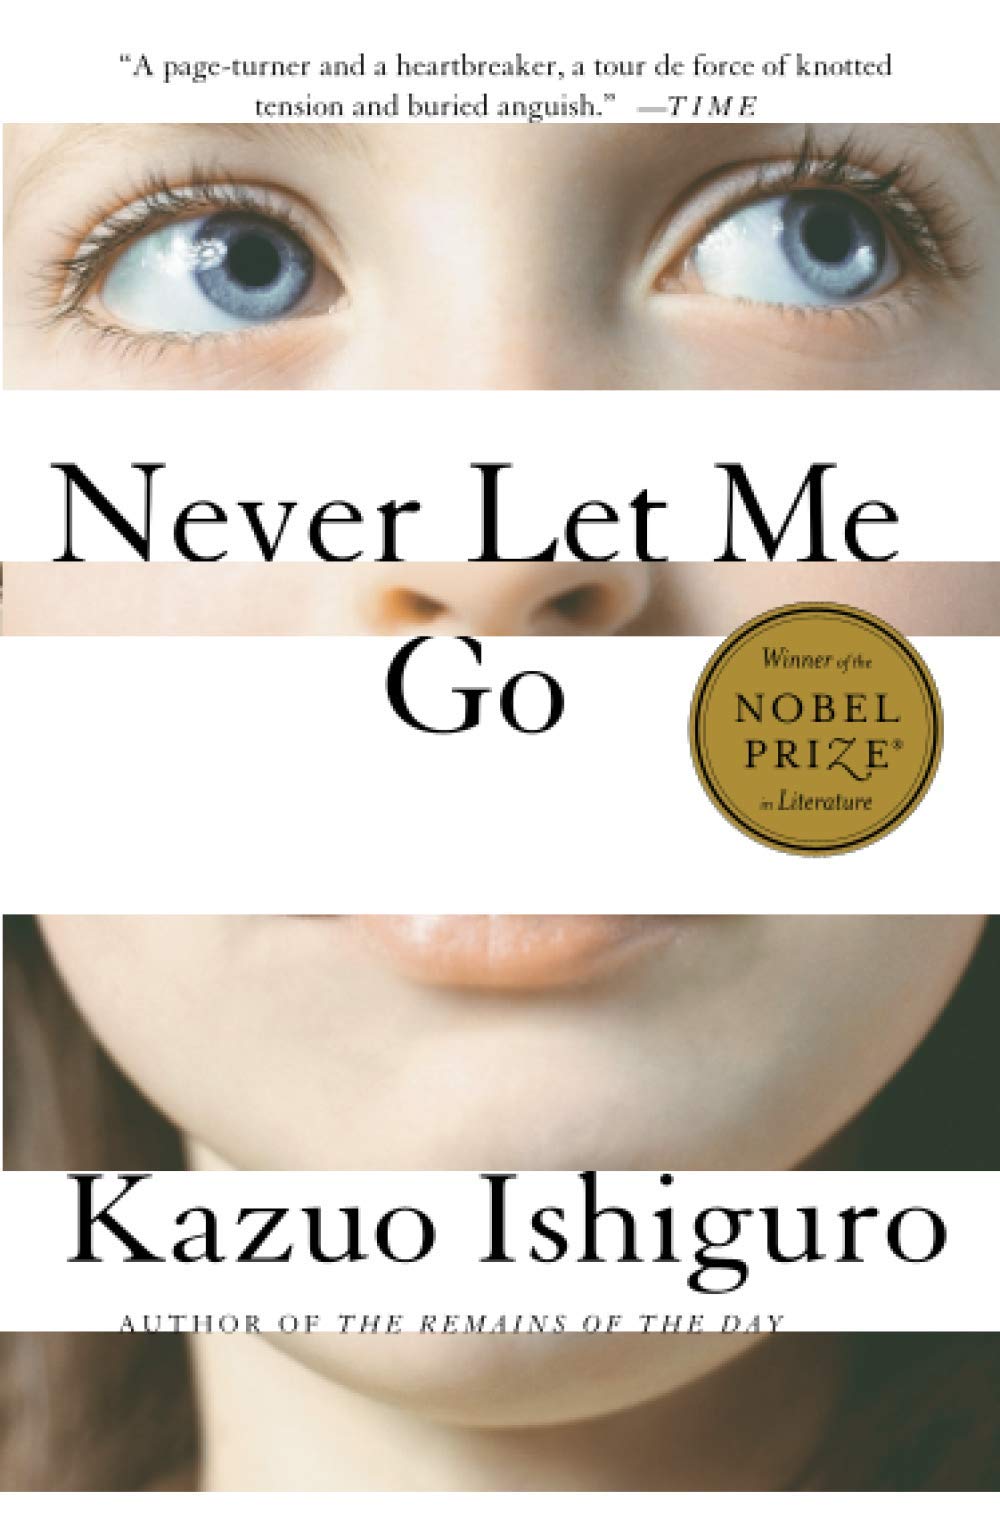 Image for "Never Let Me Go"